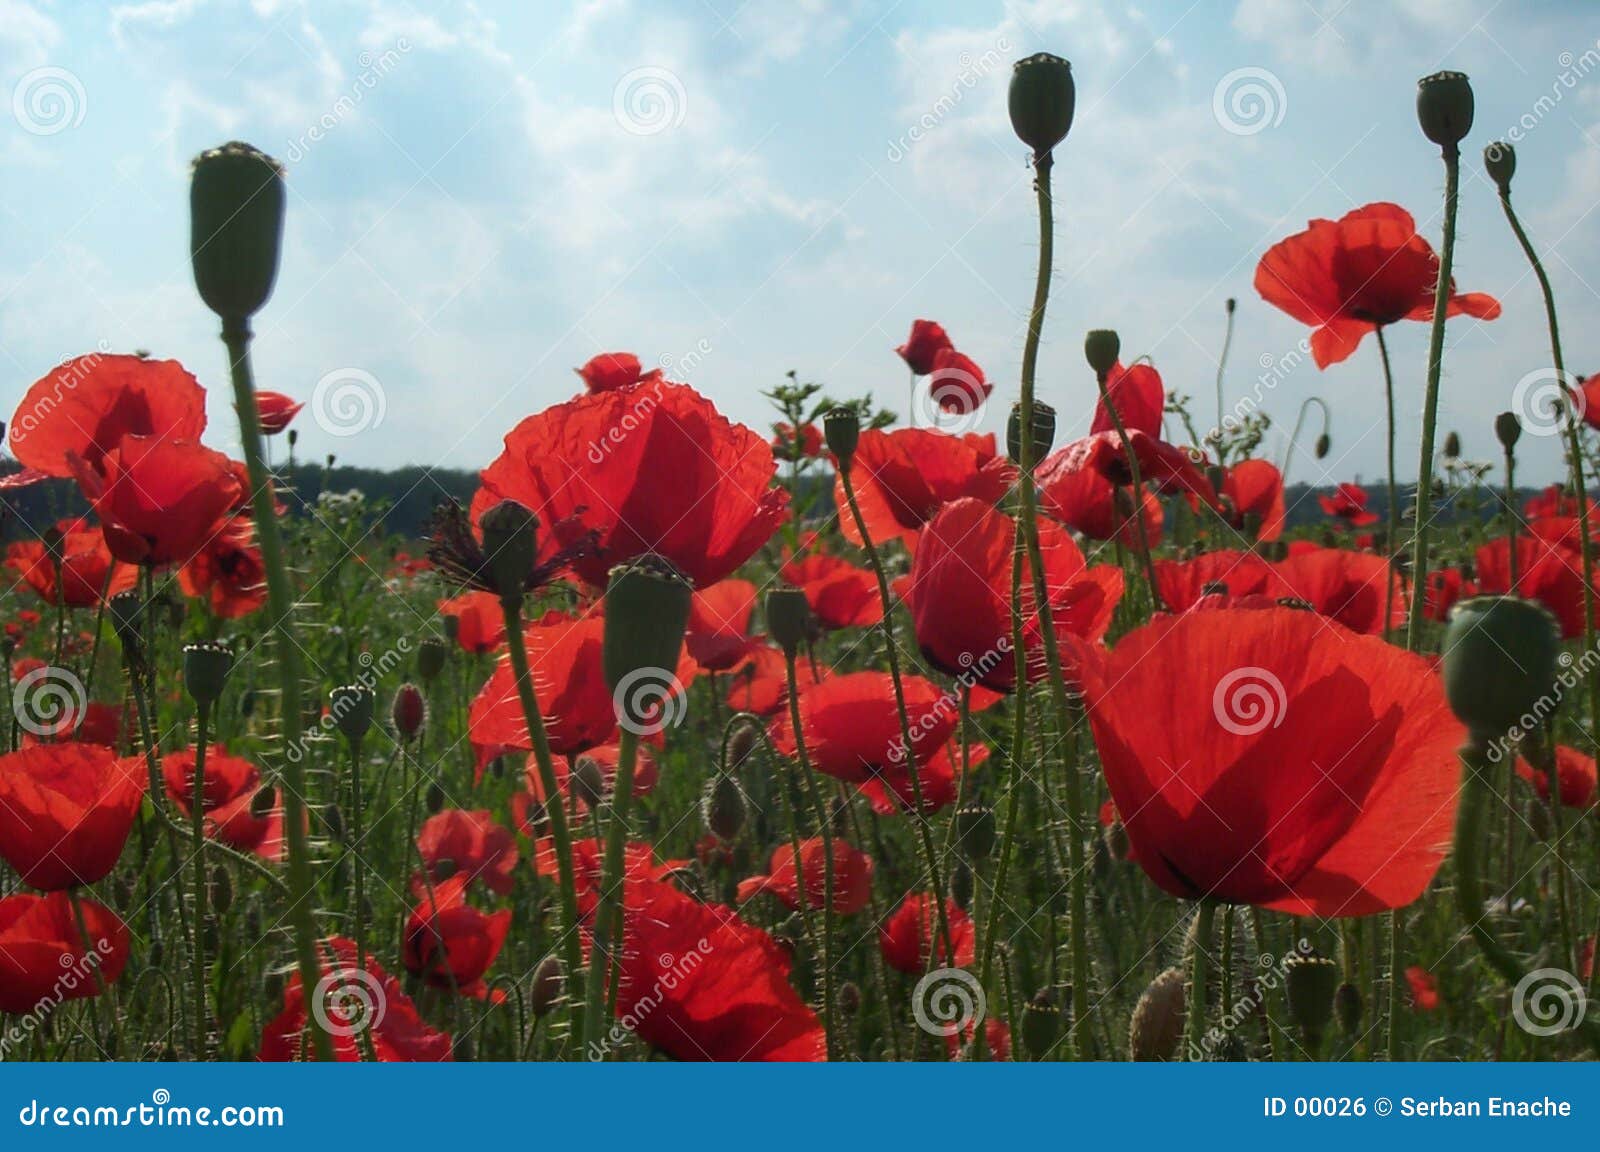 field of poppies 3